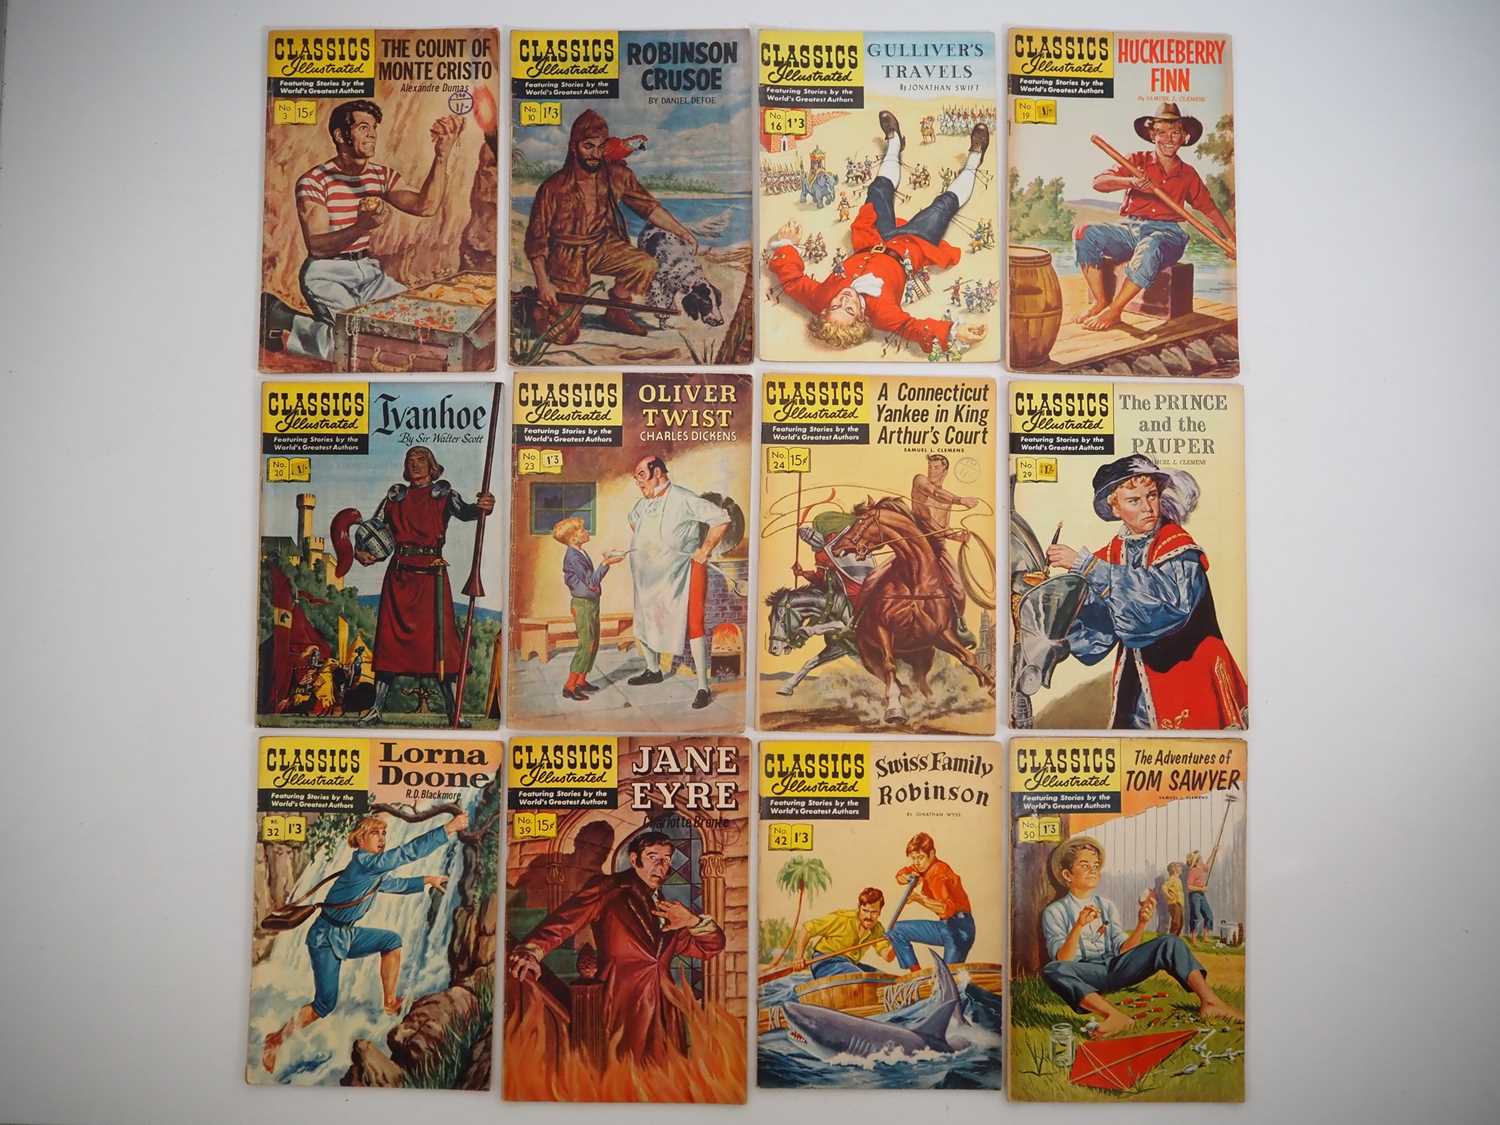 CLASSICS ILLUSTRATED: AMERICAN/BRITISH ISSUES (12 in Lot) - #3(US: HRN 167), 10(UK: HRN 153), 16(UK: